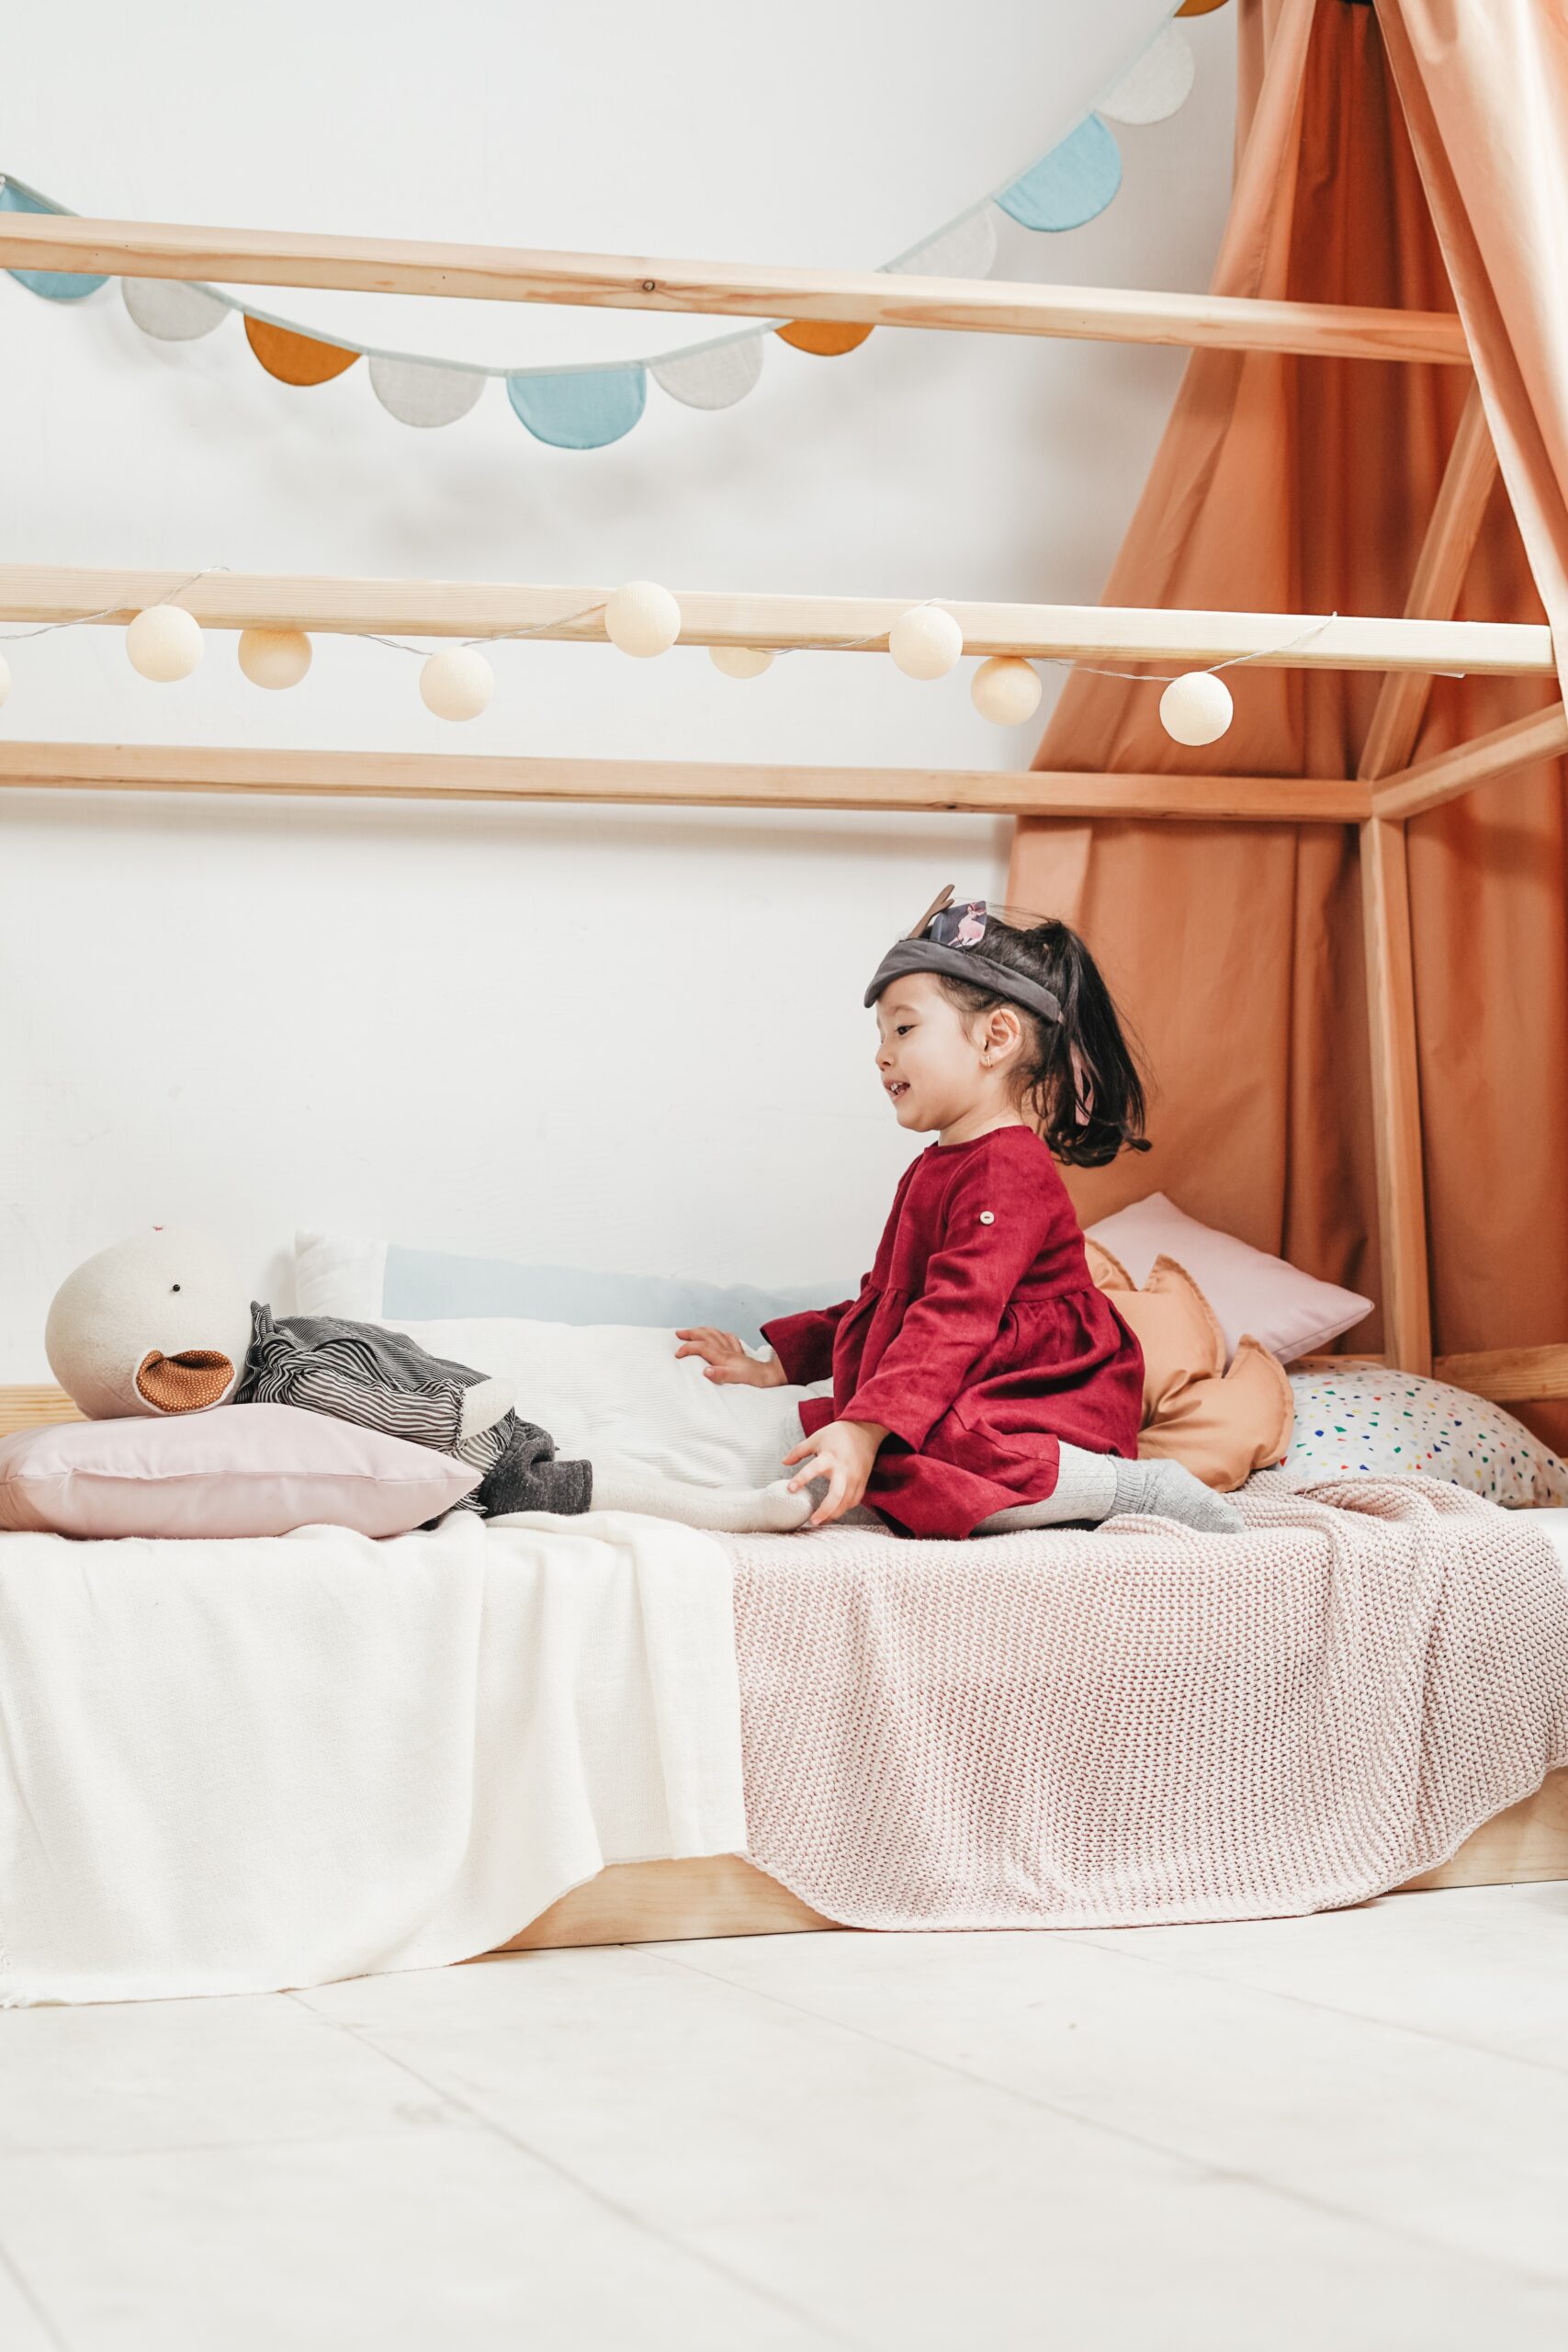 KEEPING YOUR TODDLER IN THEIR BED